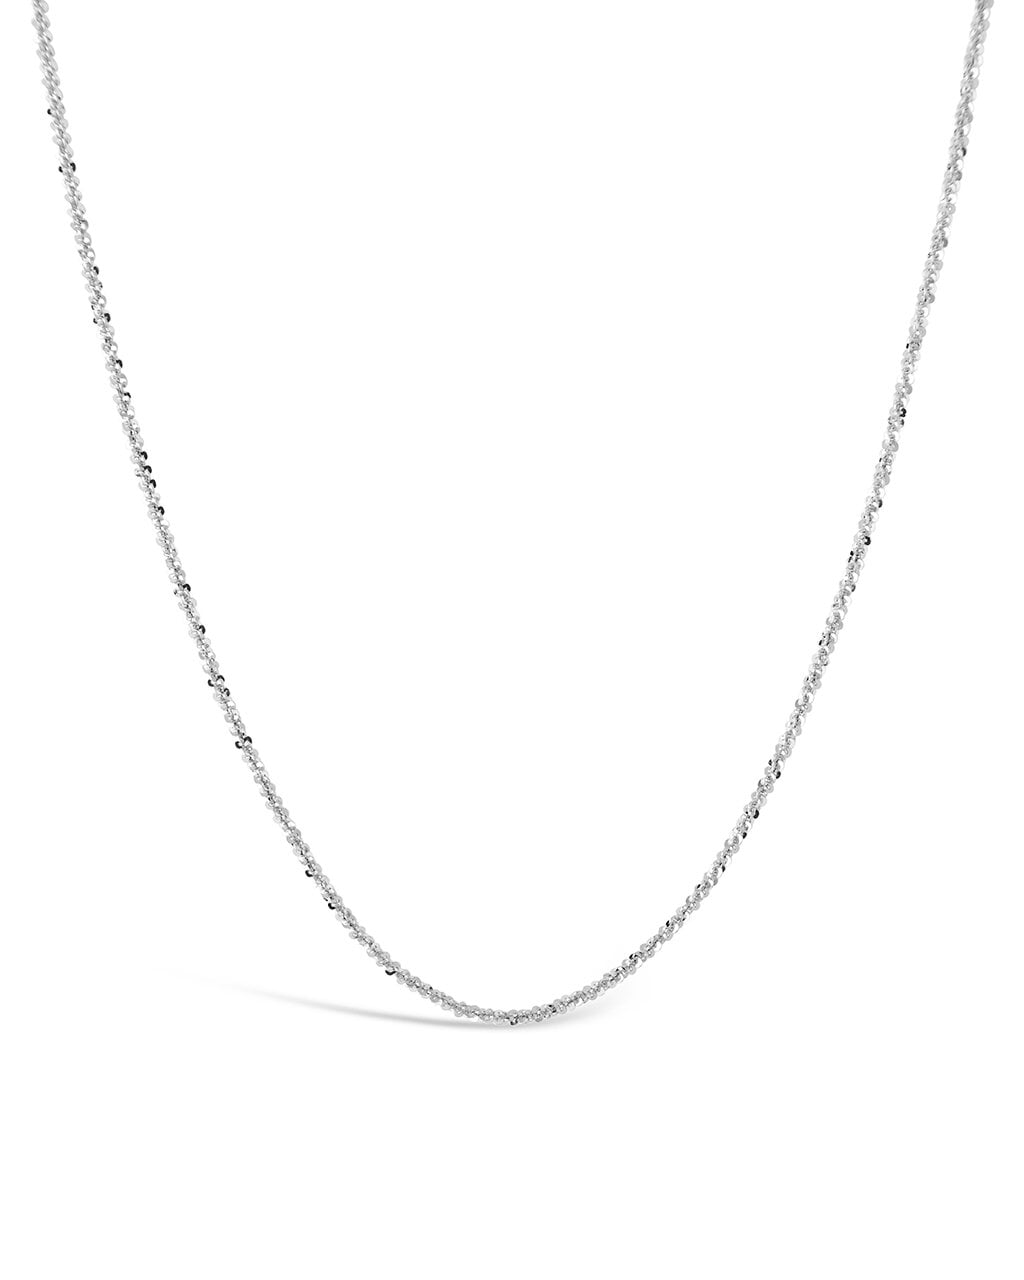 Men's Sterling Silver Rolo Chain Necklace Accessories Sterling Forever Silver 16" 